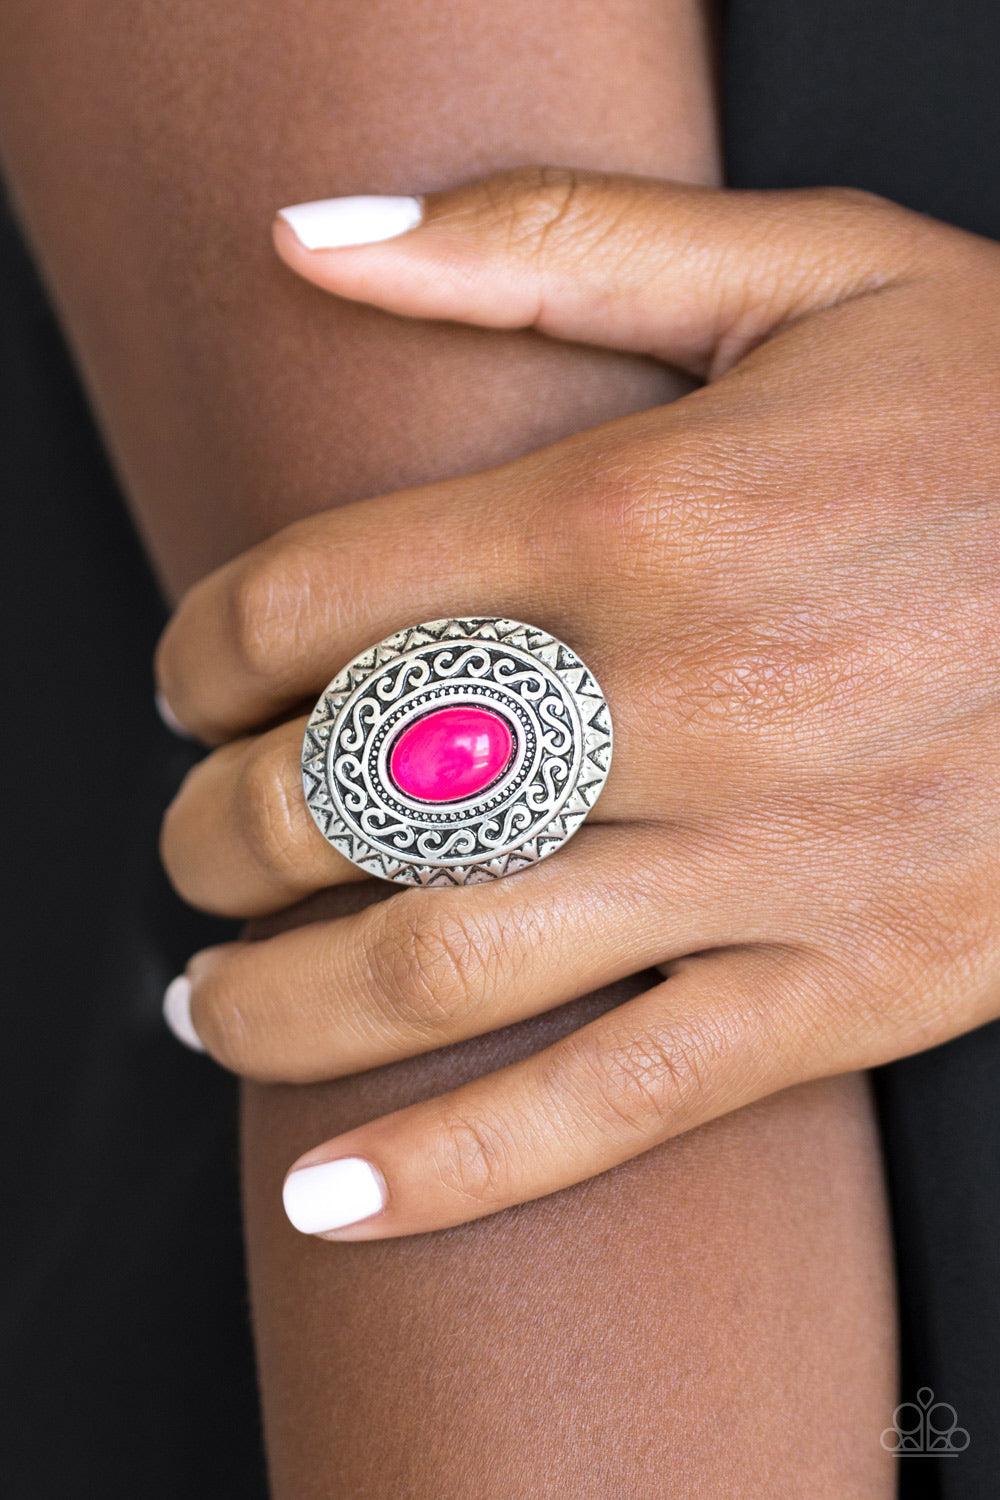 Hello, Sunshine - Pink and Silver Fashion Ring - Paparazzi Accessories - A glowing pink stone is pressed in the center of a dramatic silver frame radiating with shimmery sunburst details for a seasonal look. Features a stretchy band for a flexible fit. Sold as one individual ring.